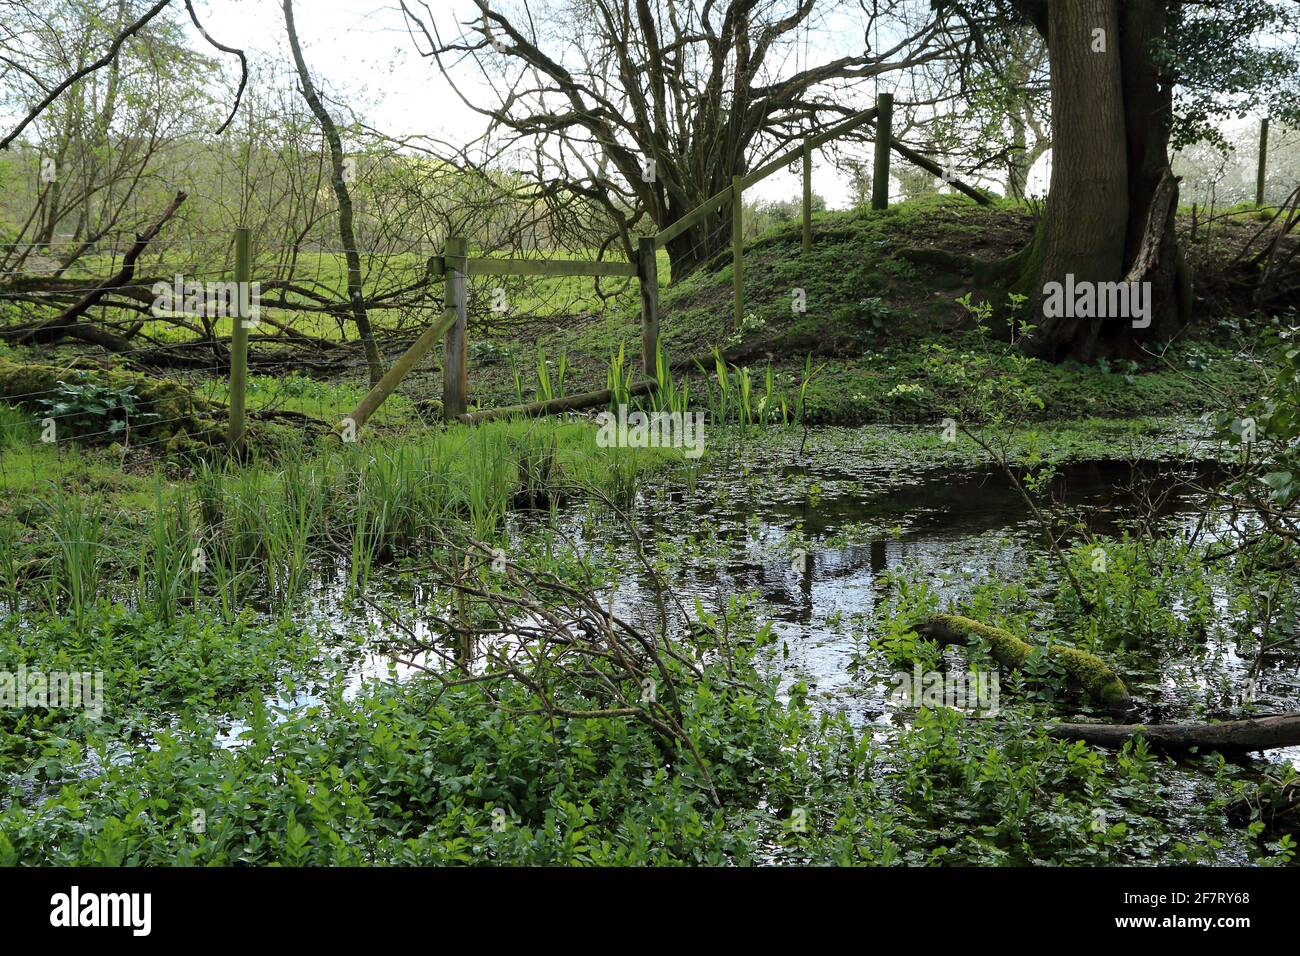 Stream at Stowting off Stowting Hill on the North Downs, Stowting, Kent, England, United Kingdom Stock Photo